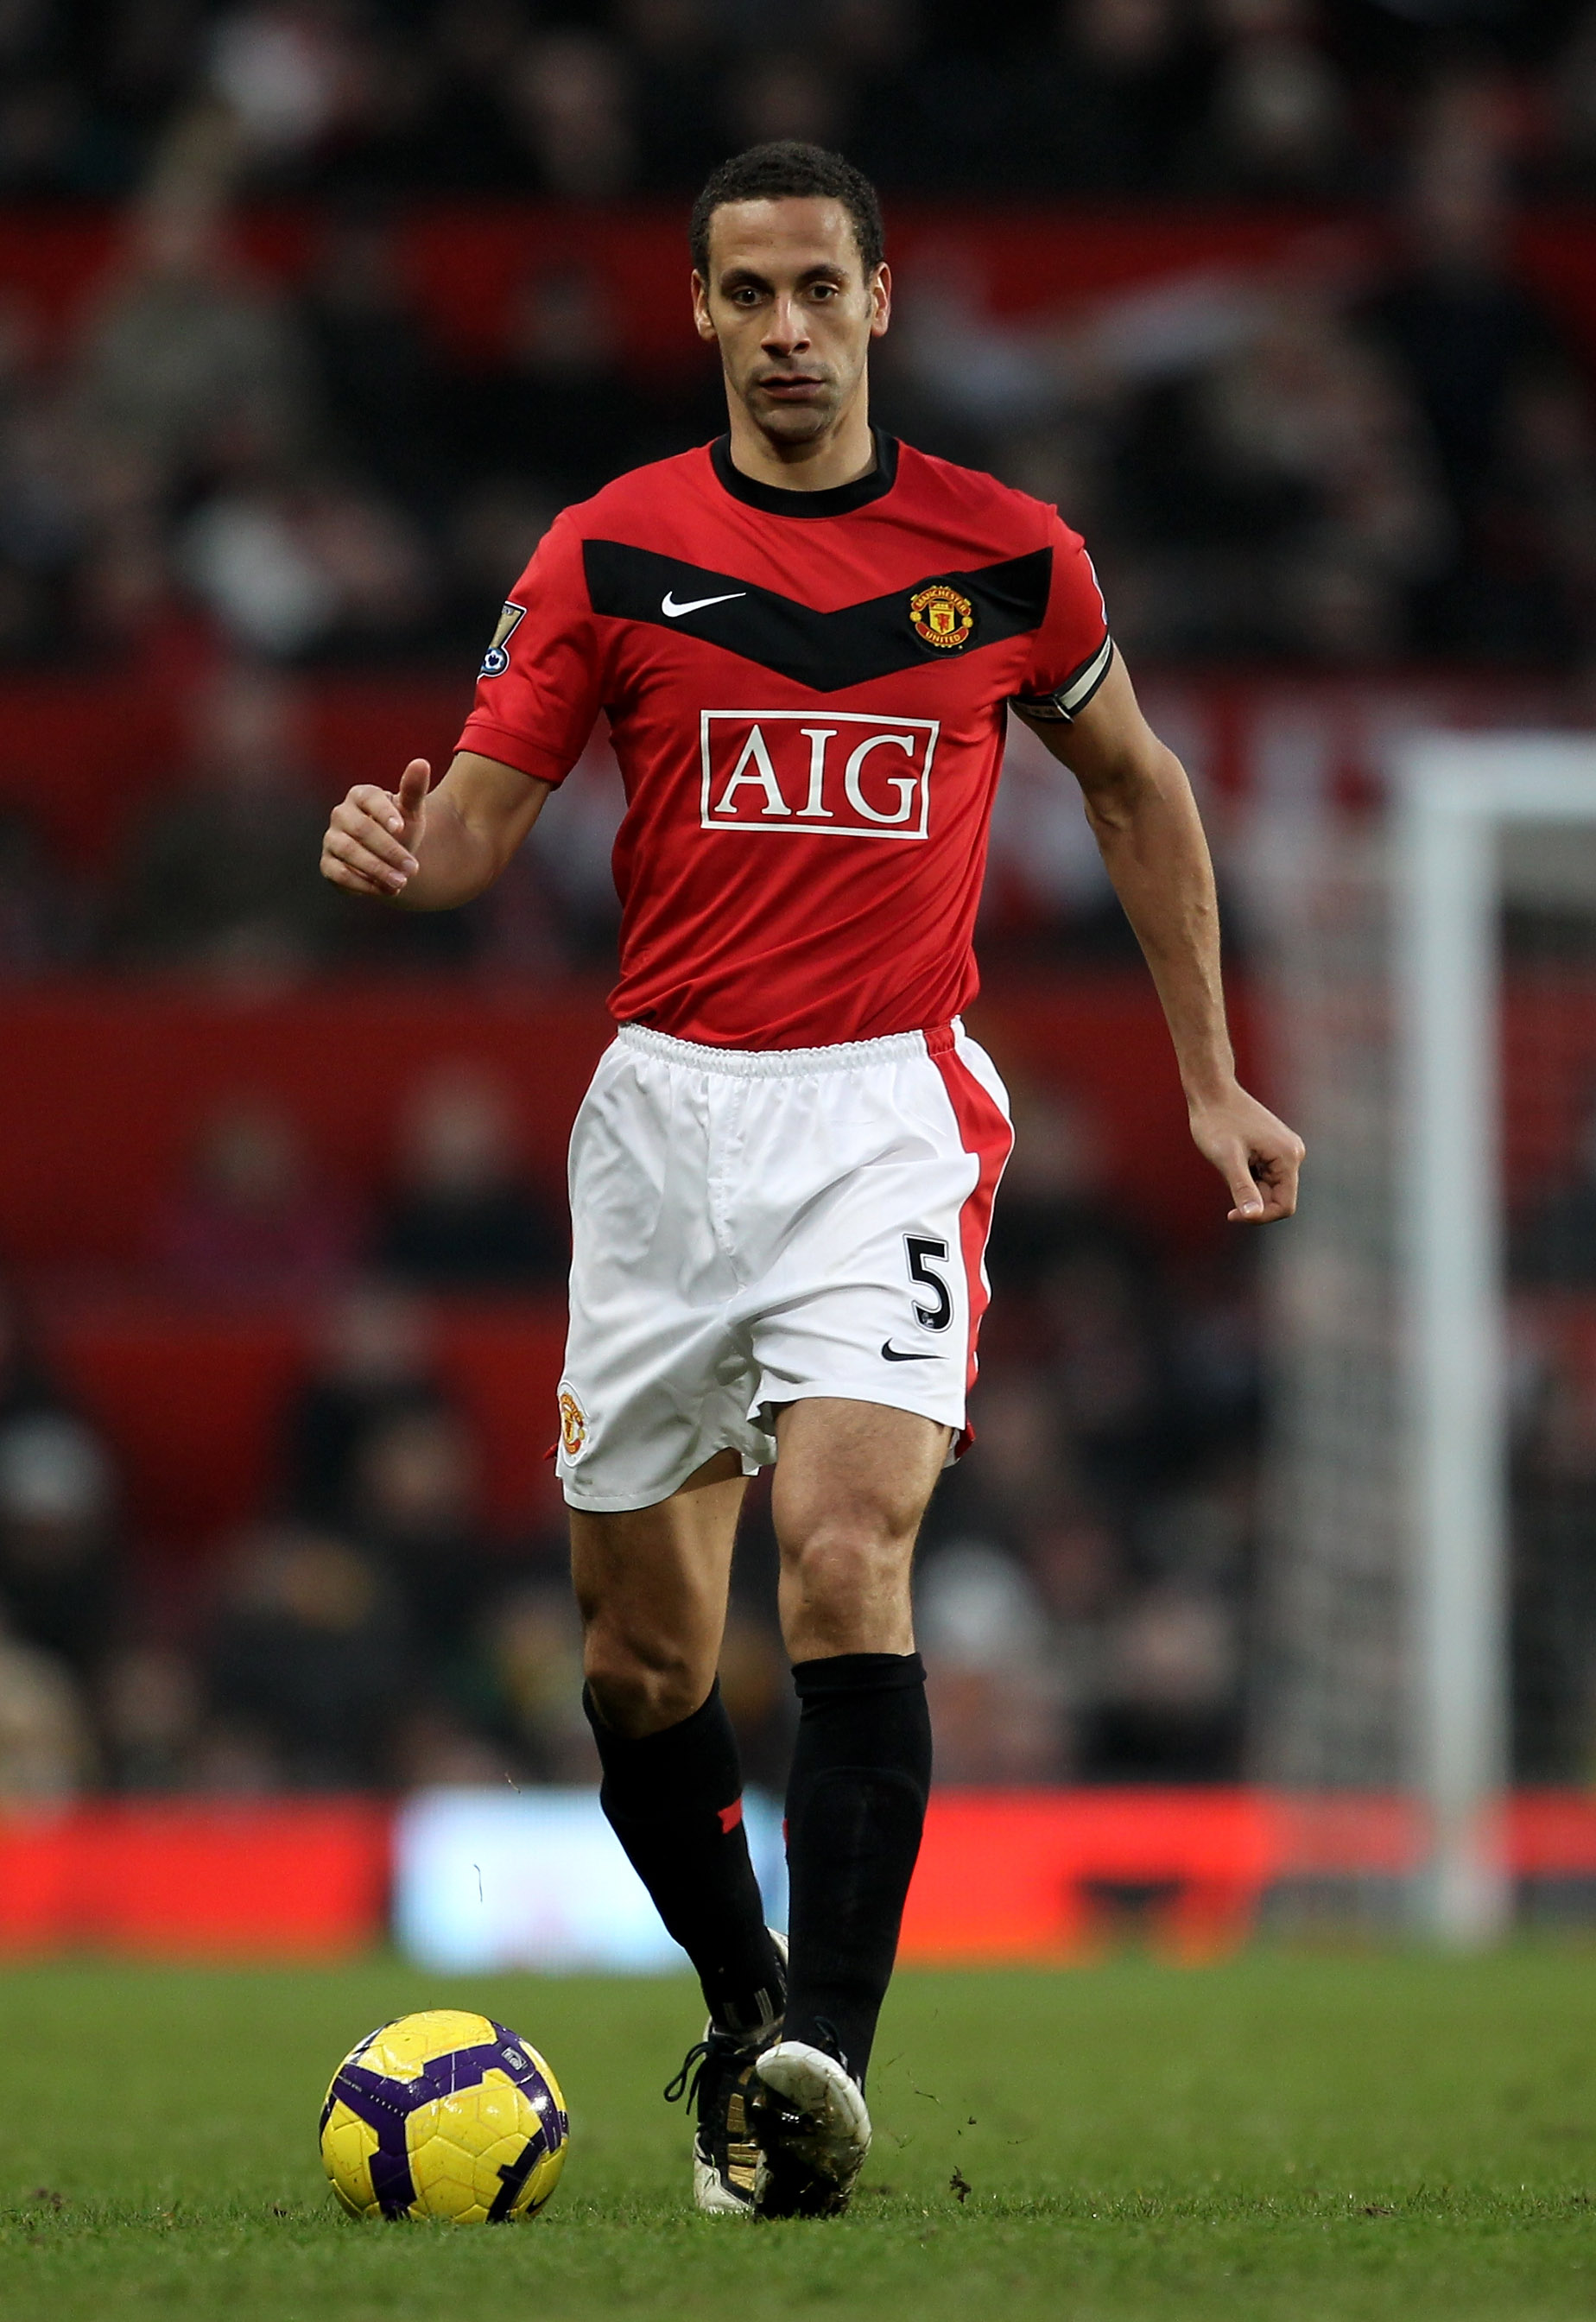 MANCHESTER, ENGLAND - JANUARY 23:  Rio Ferdinand of Manchester United in action during the Barclays Premier League match between Manchester United and Hull City at Old Trafford on January 23, 2010 in Manchester, England.  (Photo by Julian Finney/Getty Ima